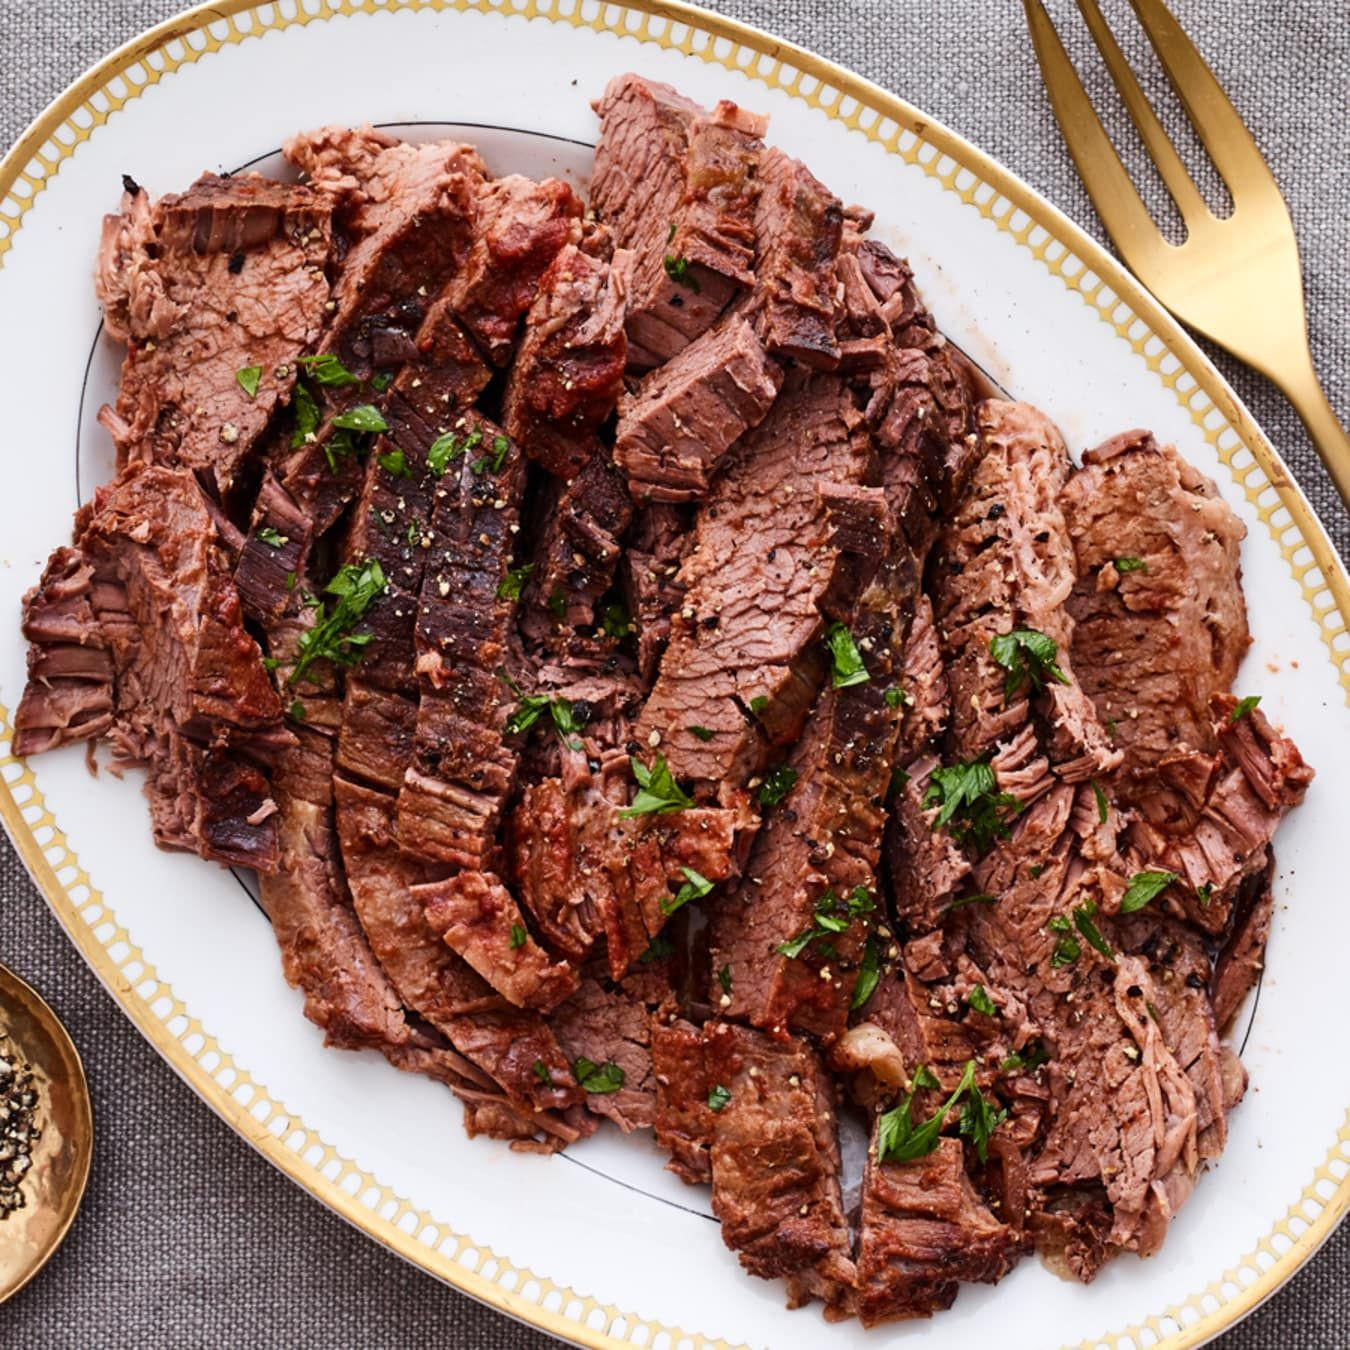 Passover Brisket Recipe Oven
 Cooking A Whole Brisket Overnight Is Perfection in 2019